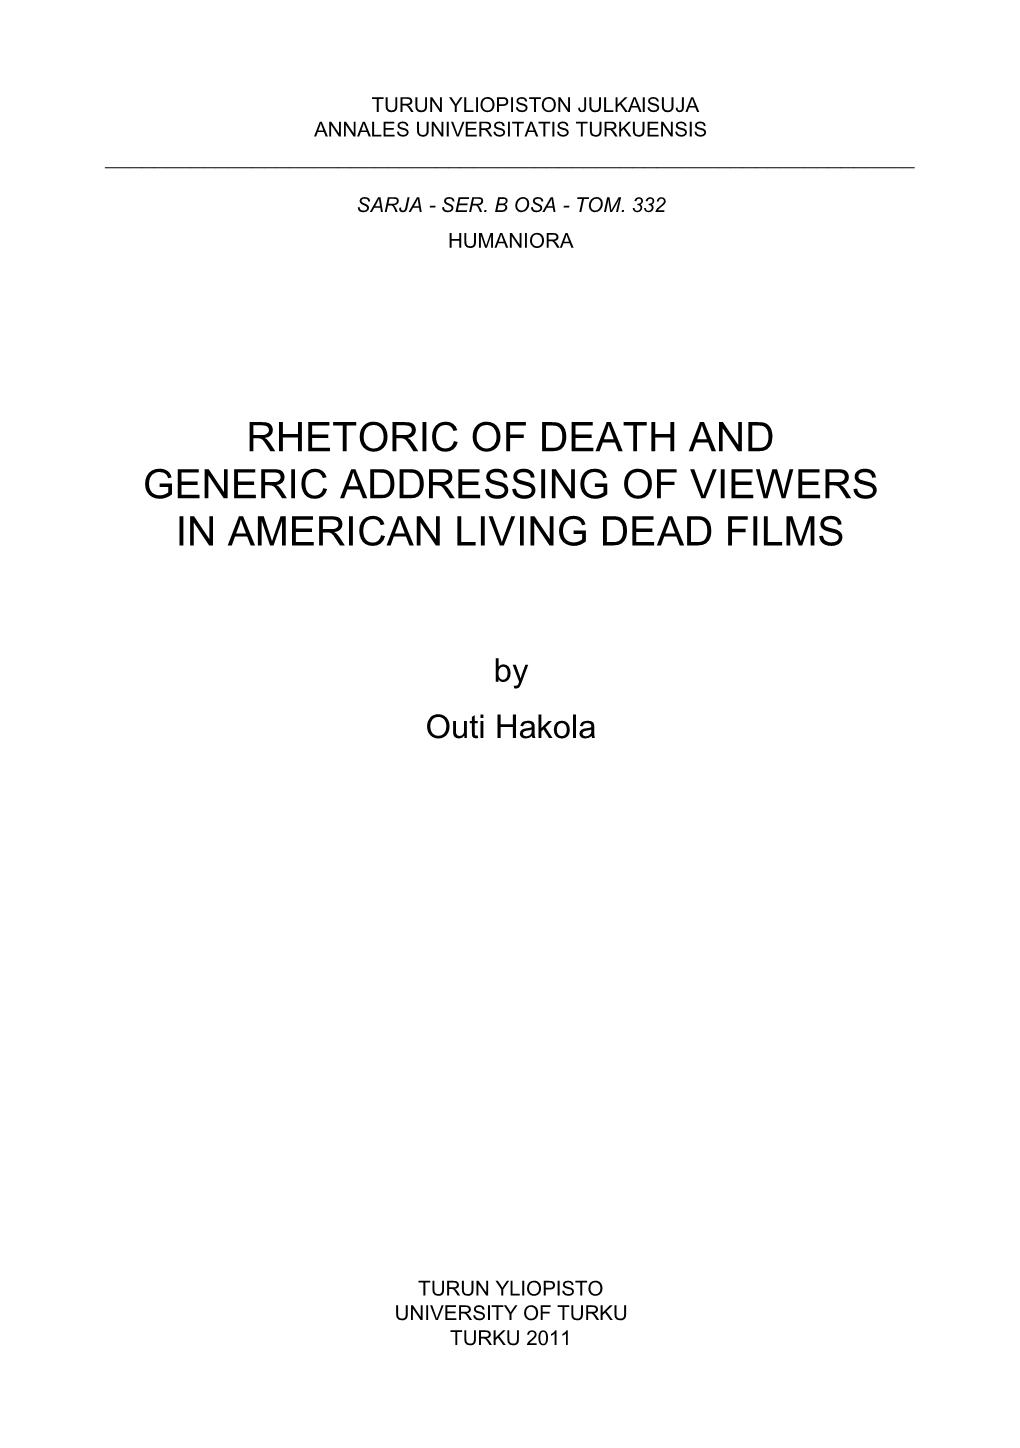 Rhetoric of Death and Generic Addressing of Viewers in American Living Dead Films